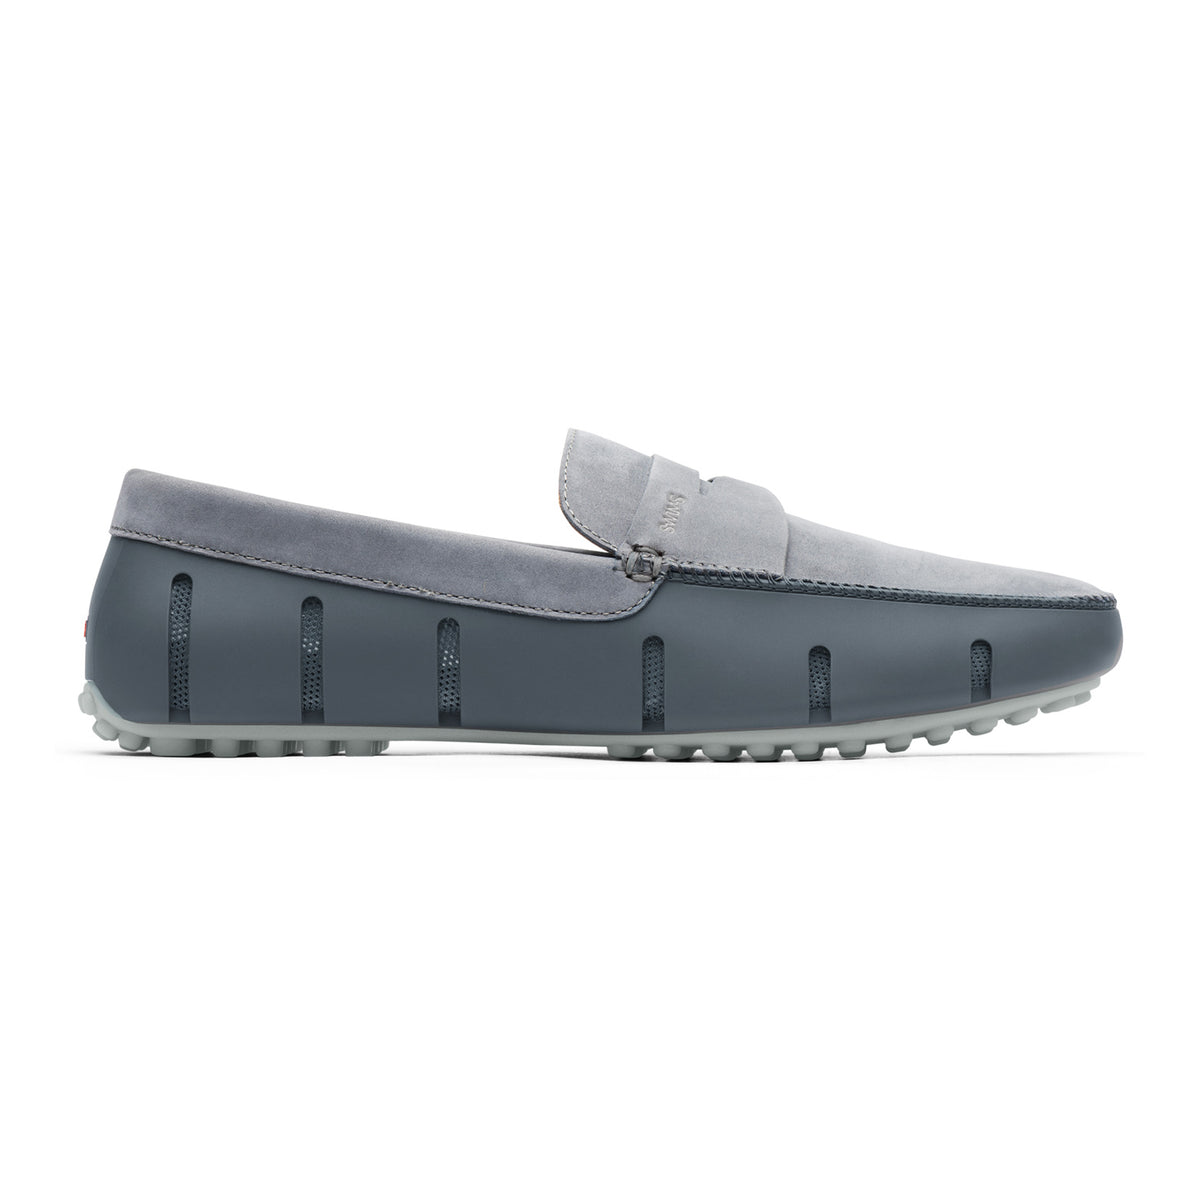 swims penny loafer driver